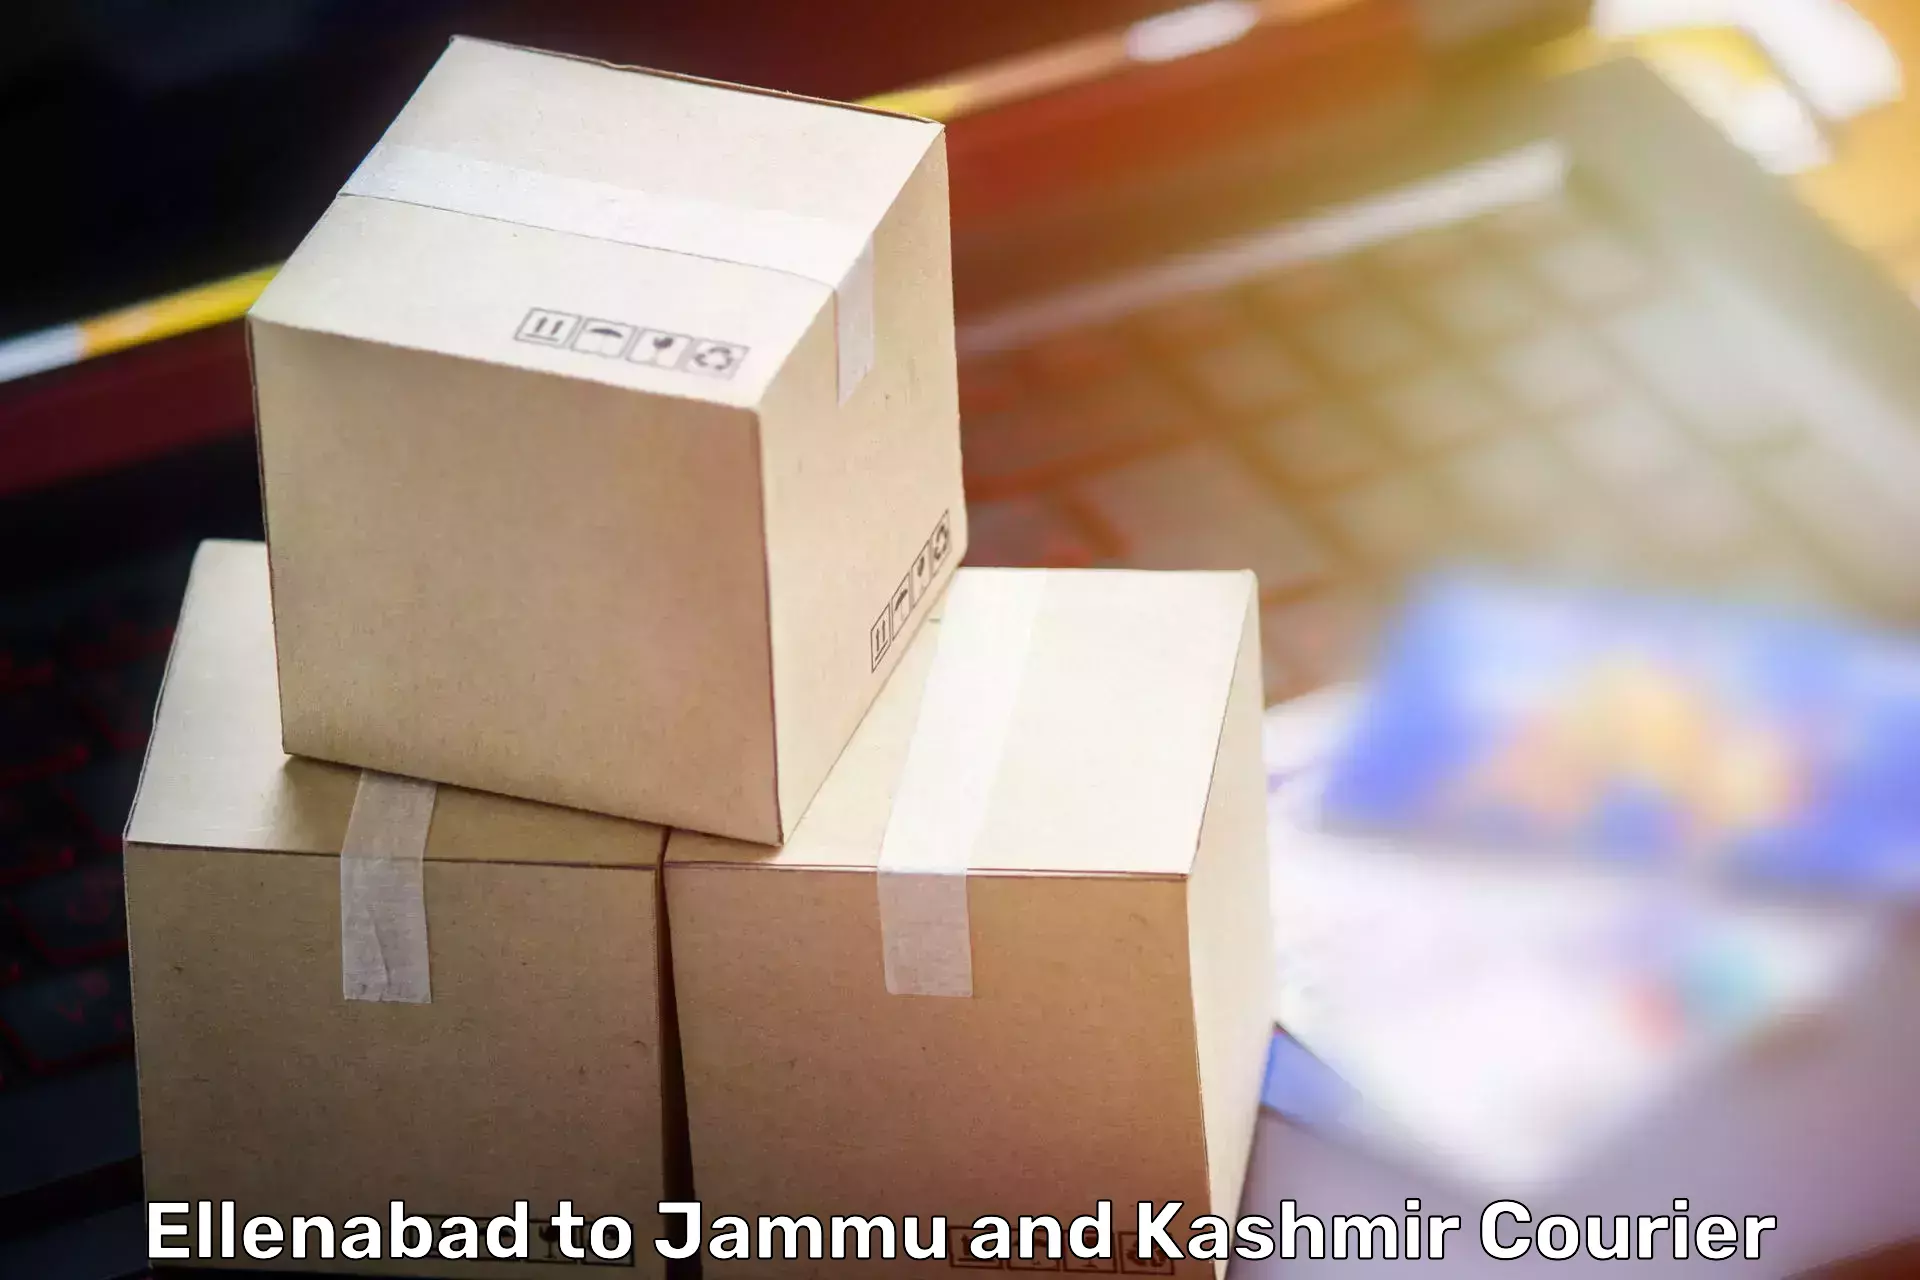 Quality moving and storage in Ellenabad to University of Jammu